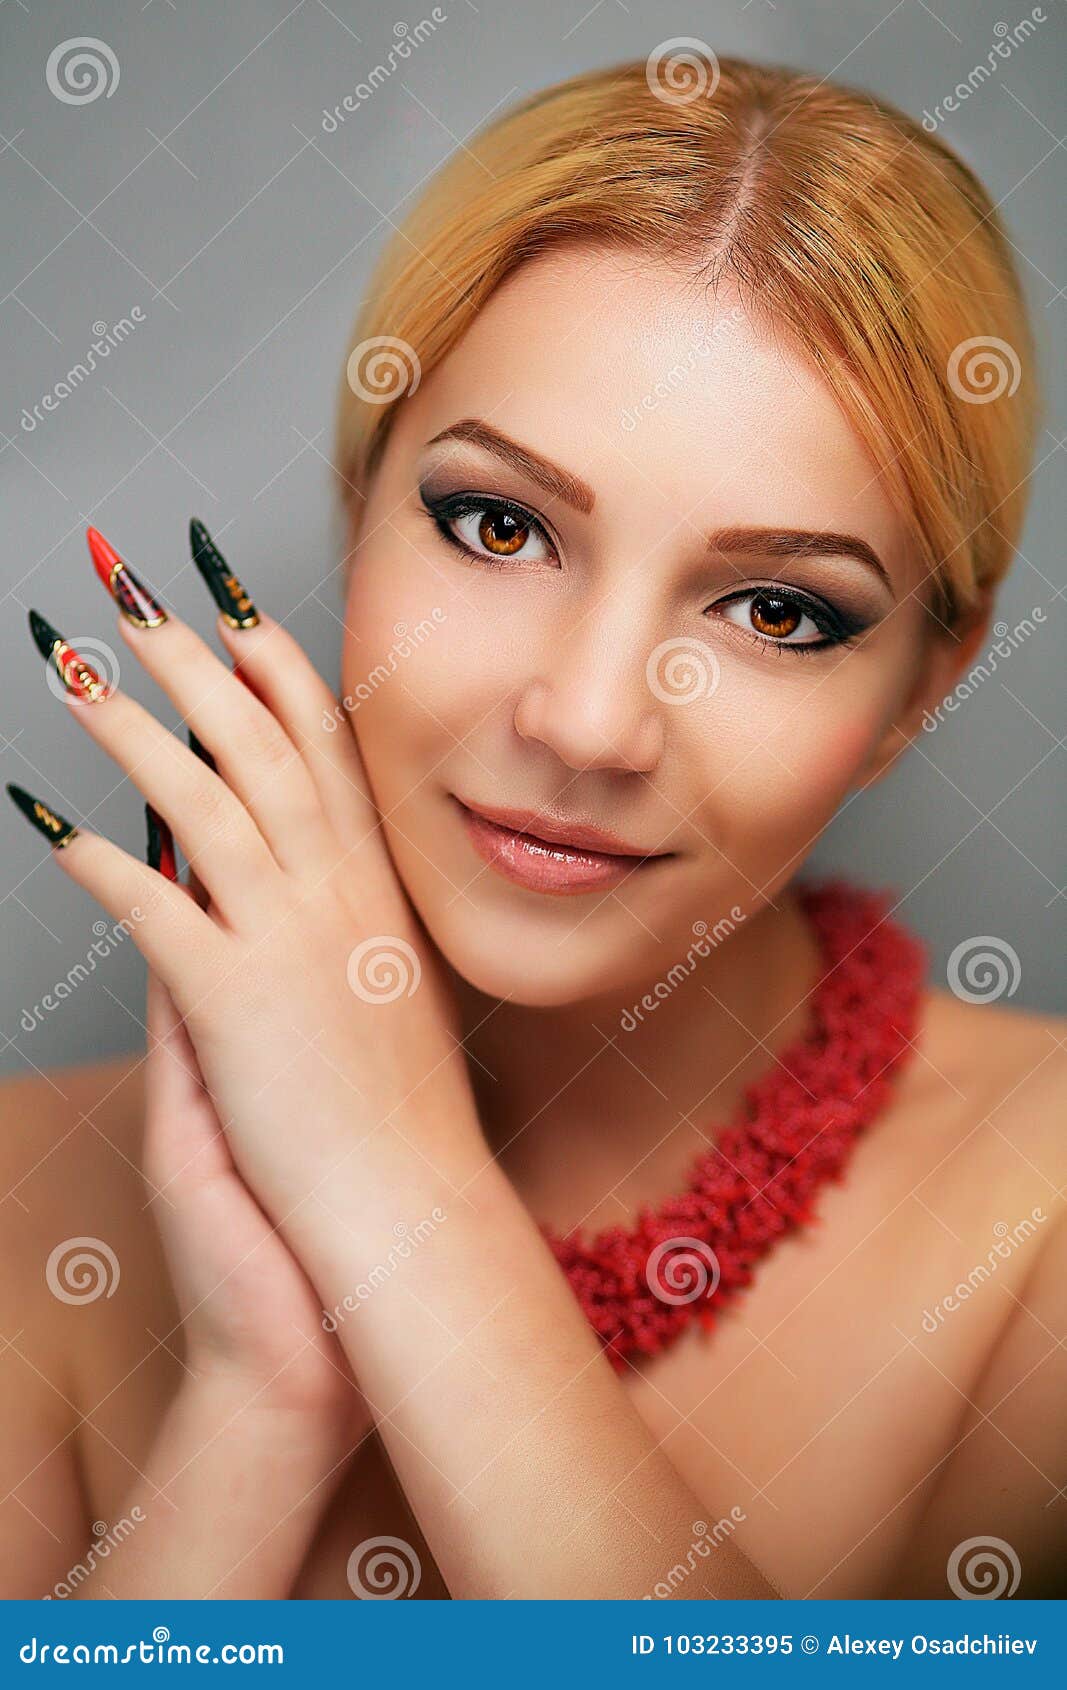 What do long nails say about a woman?